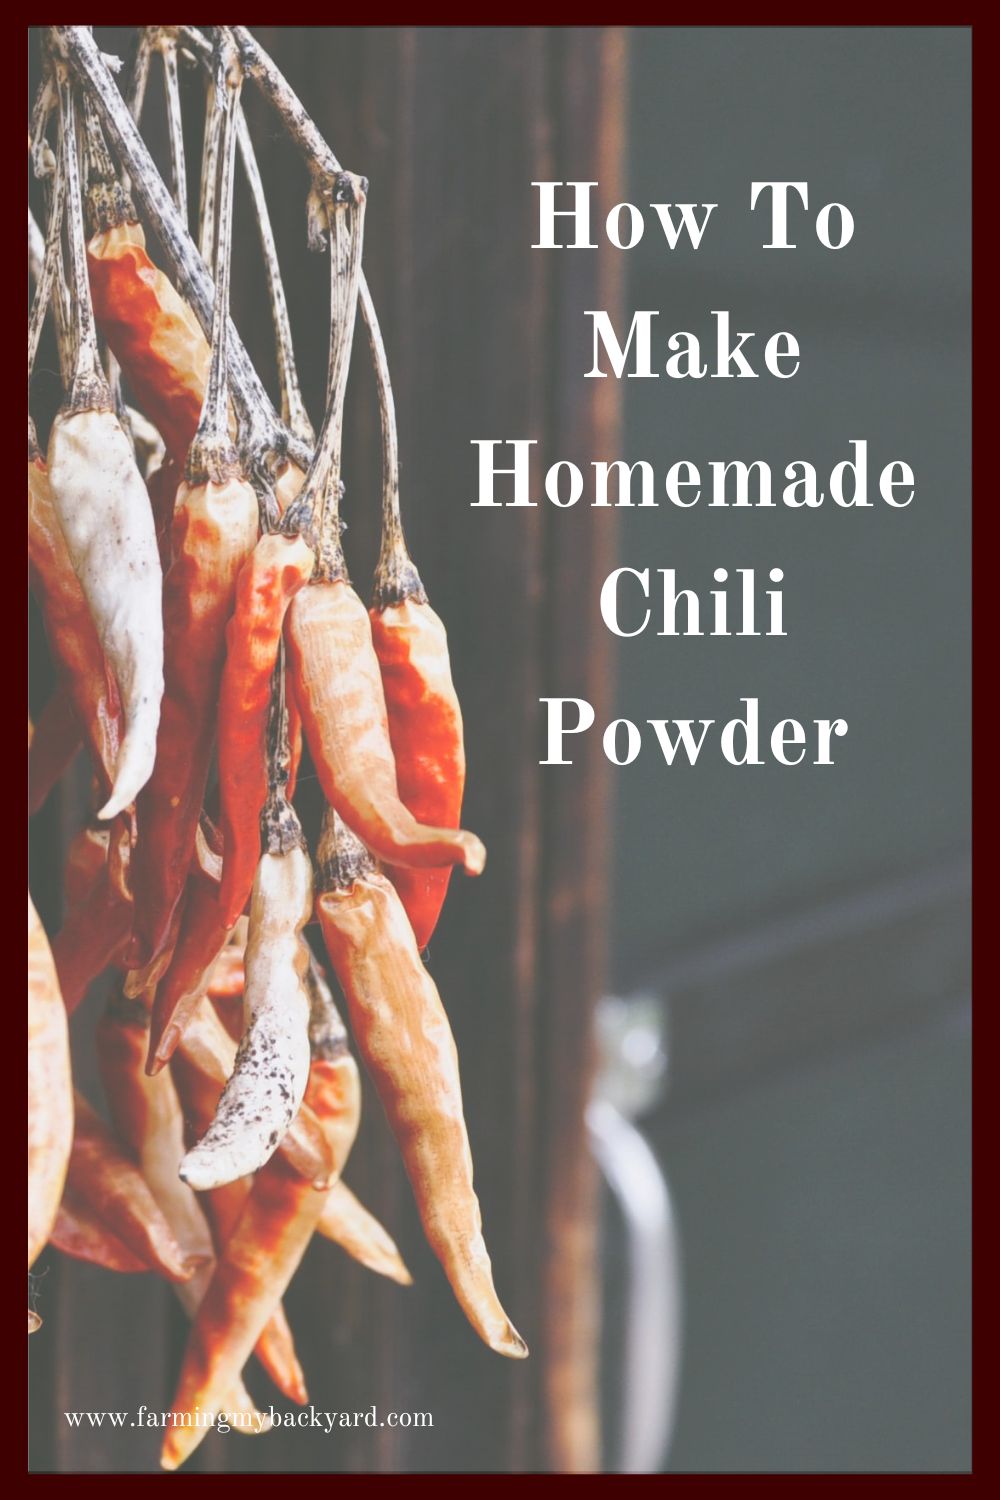 Homemade chili powder is super easy to make, all you need are dried chilis and a blender!